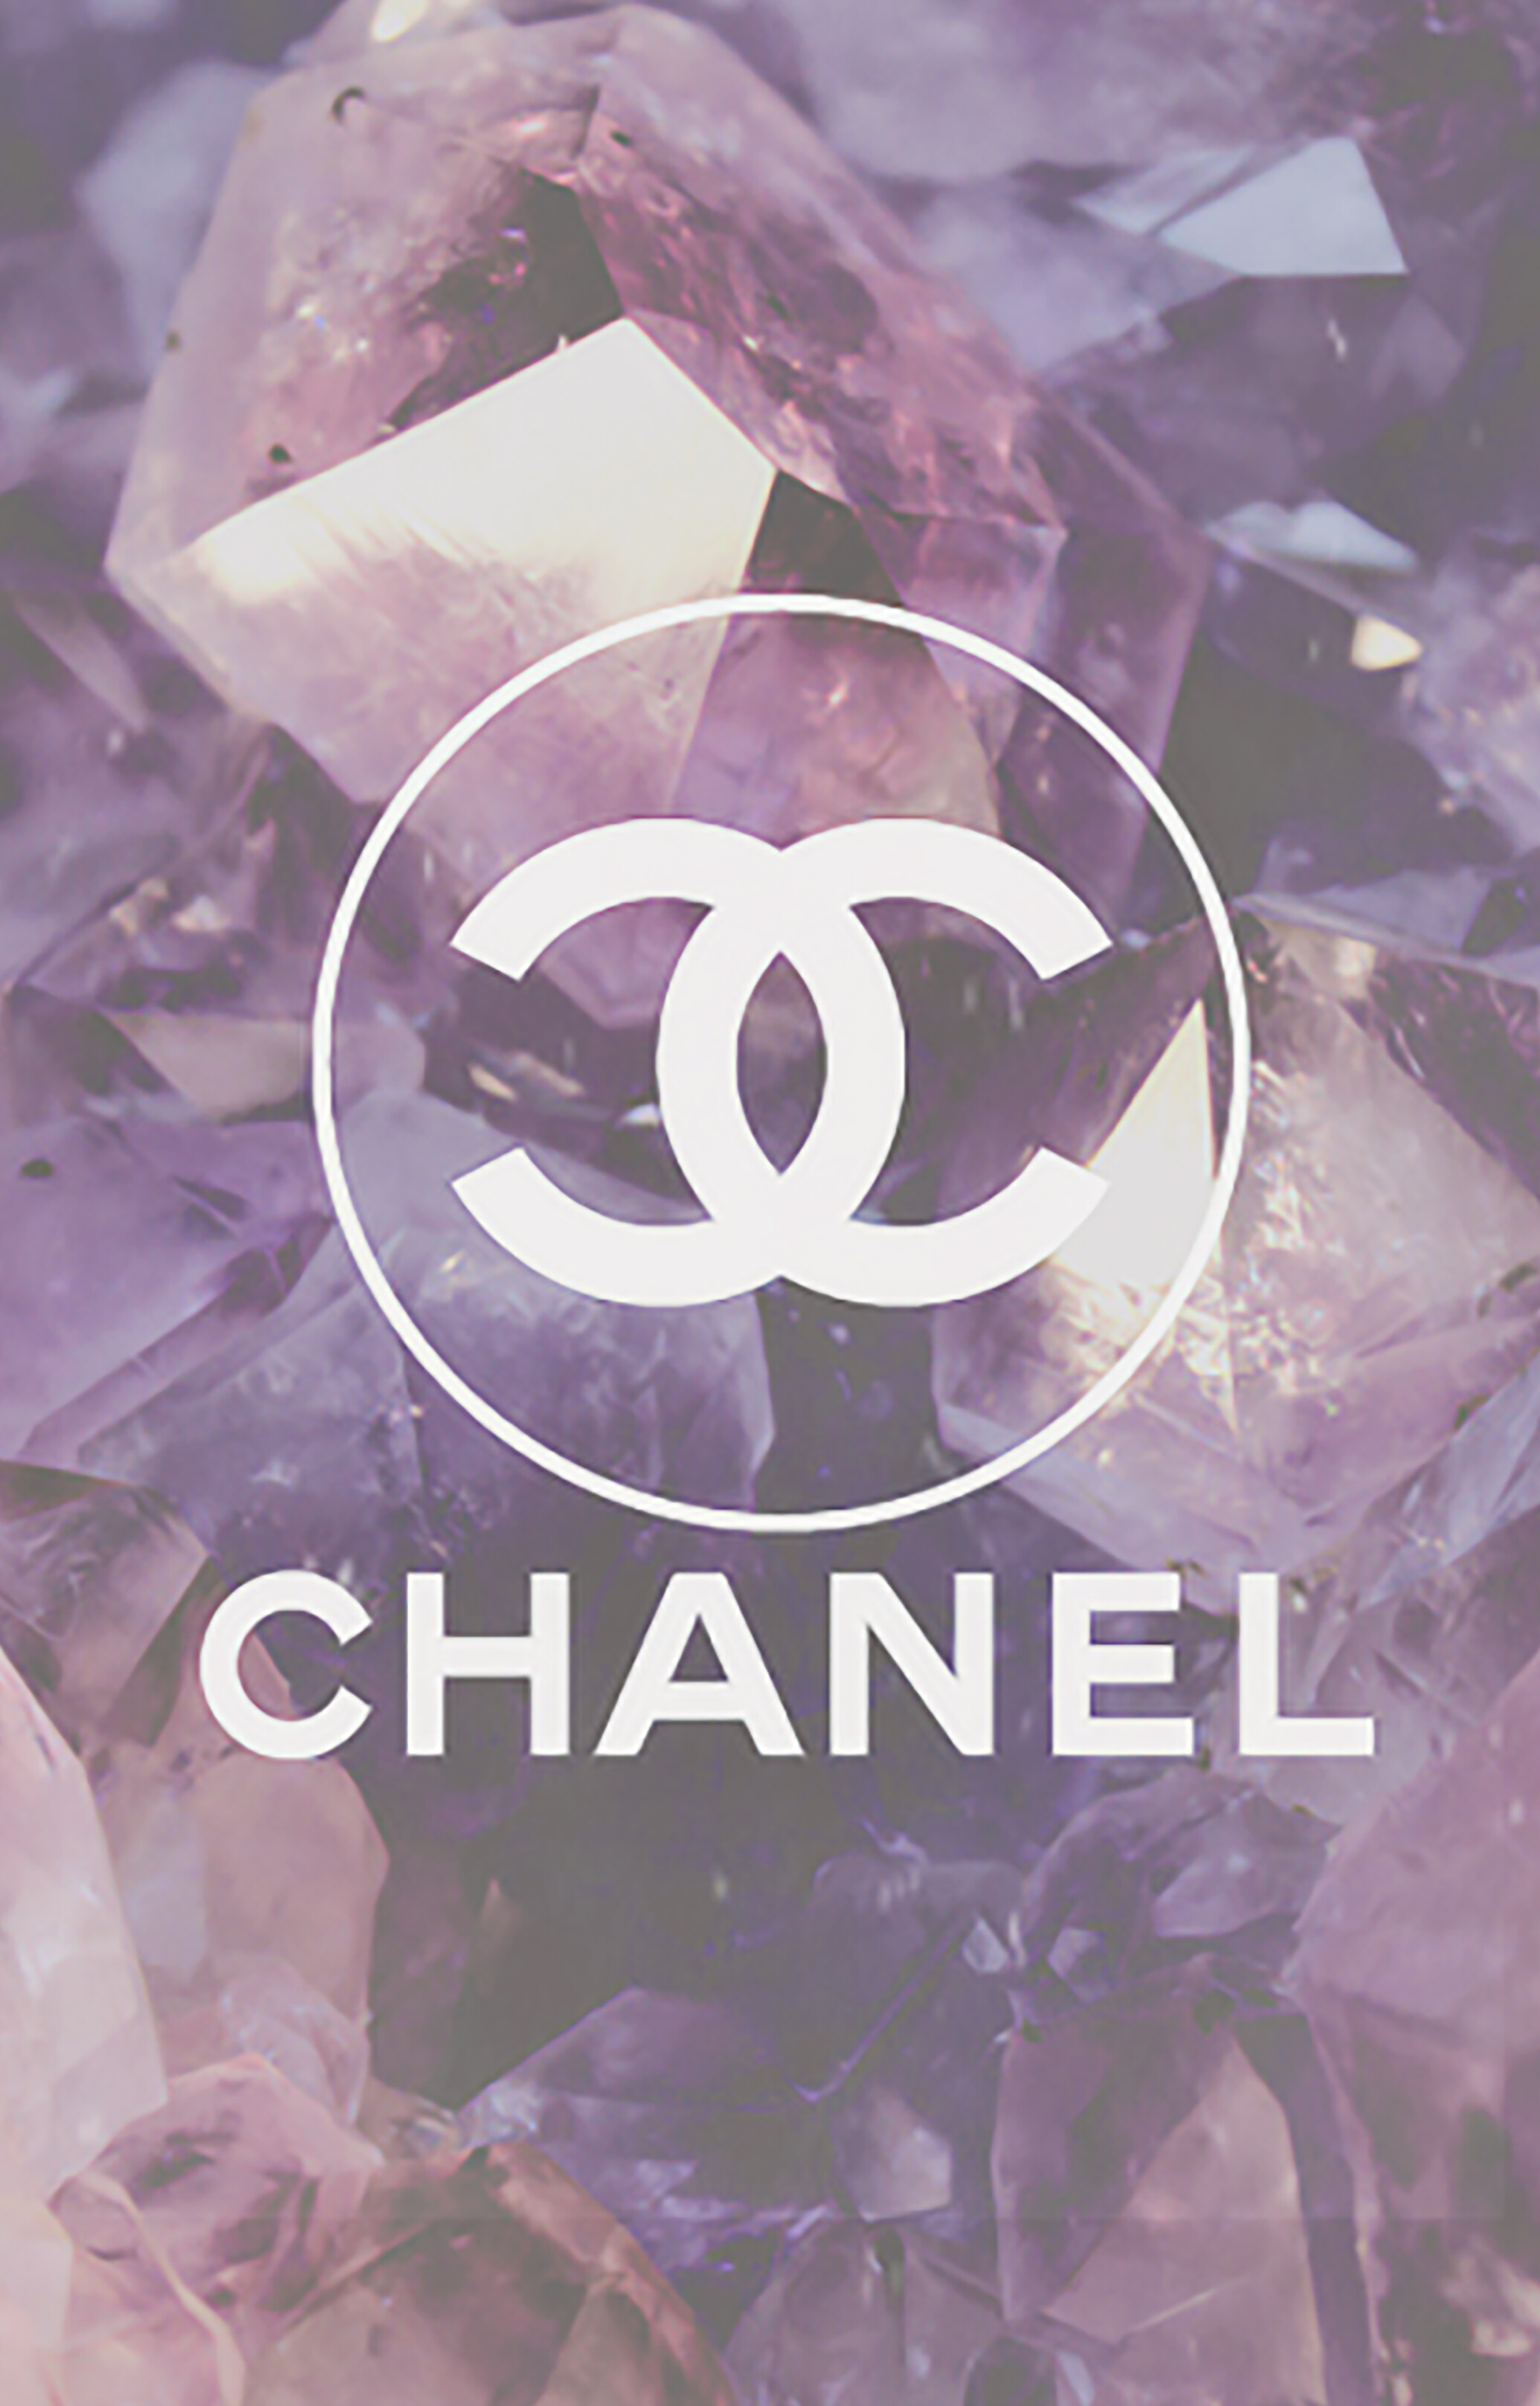 Chanel Wallpapers (44+ images inside)